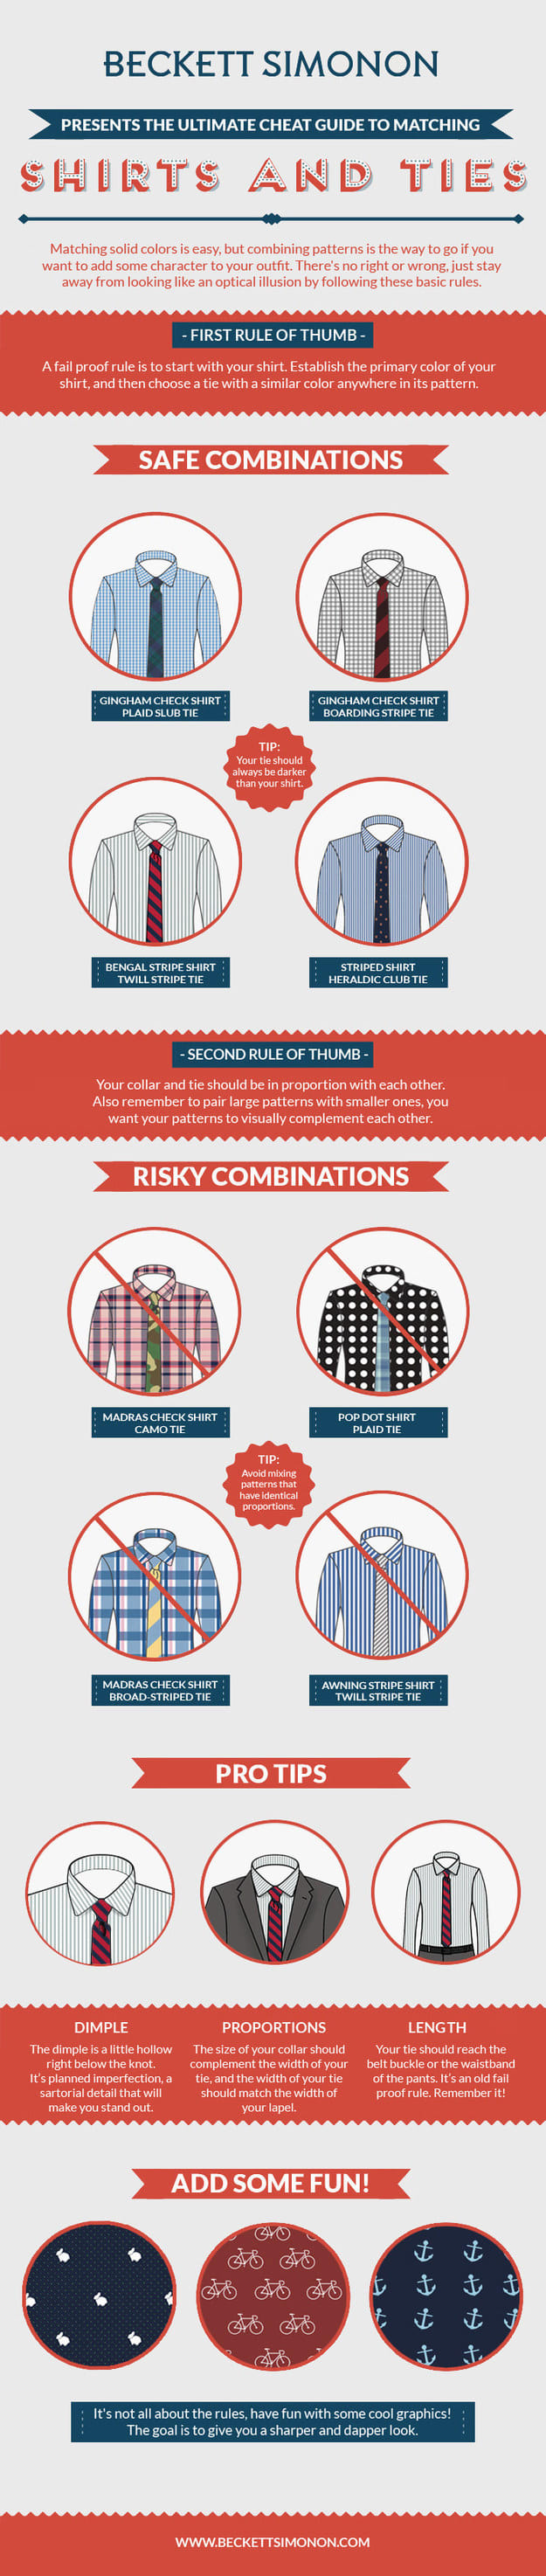 Before you throw on that shirt with that tie, STOP! And take a look at these helpful color and pattern combos.